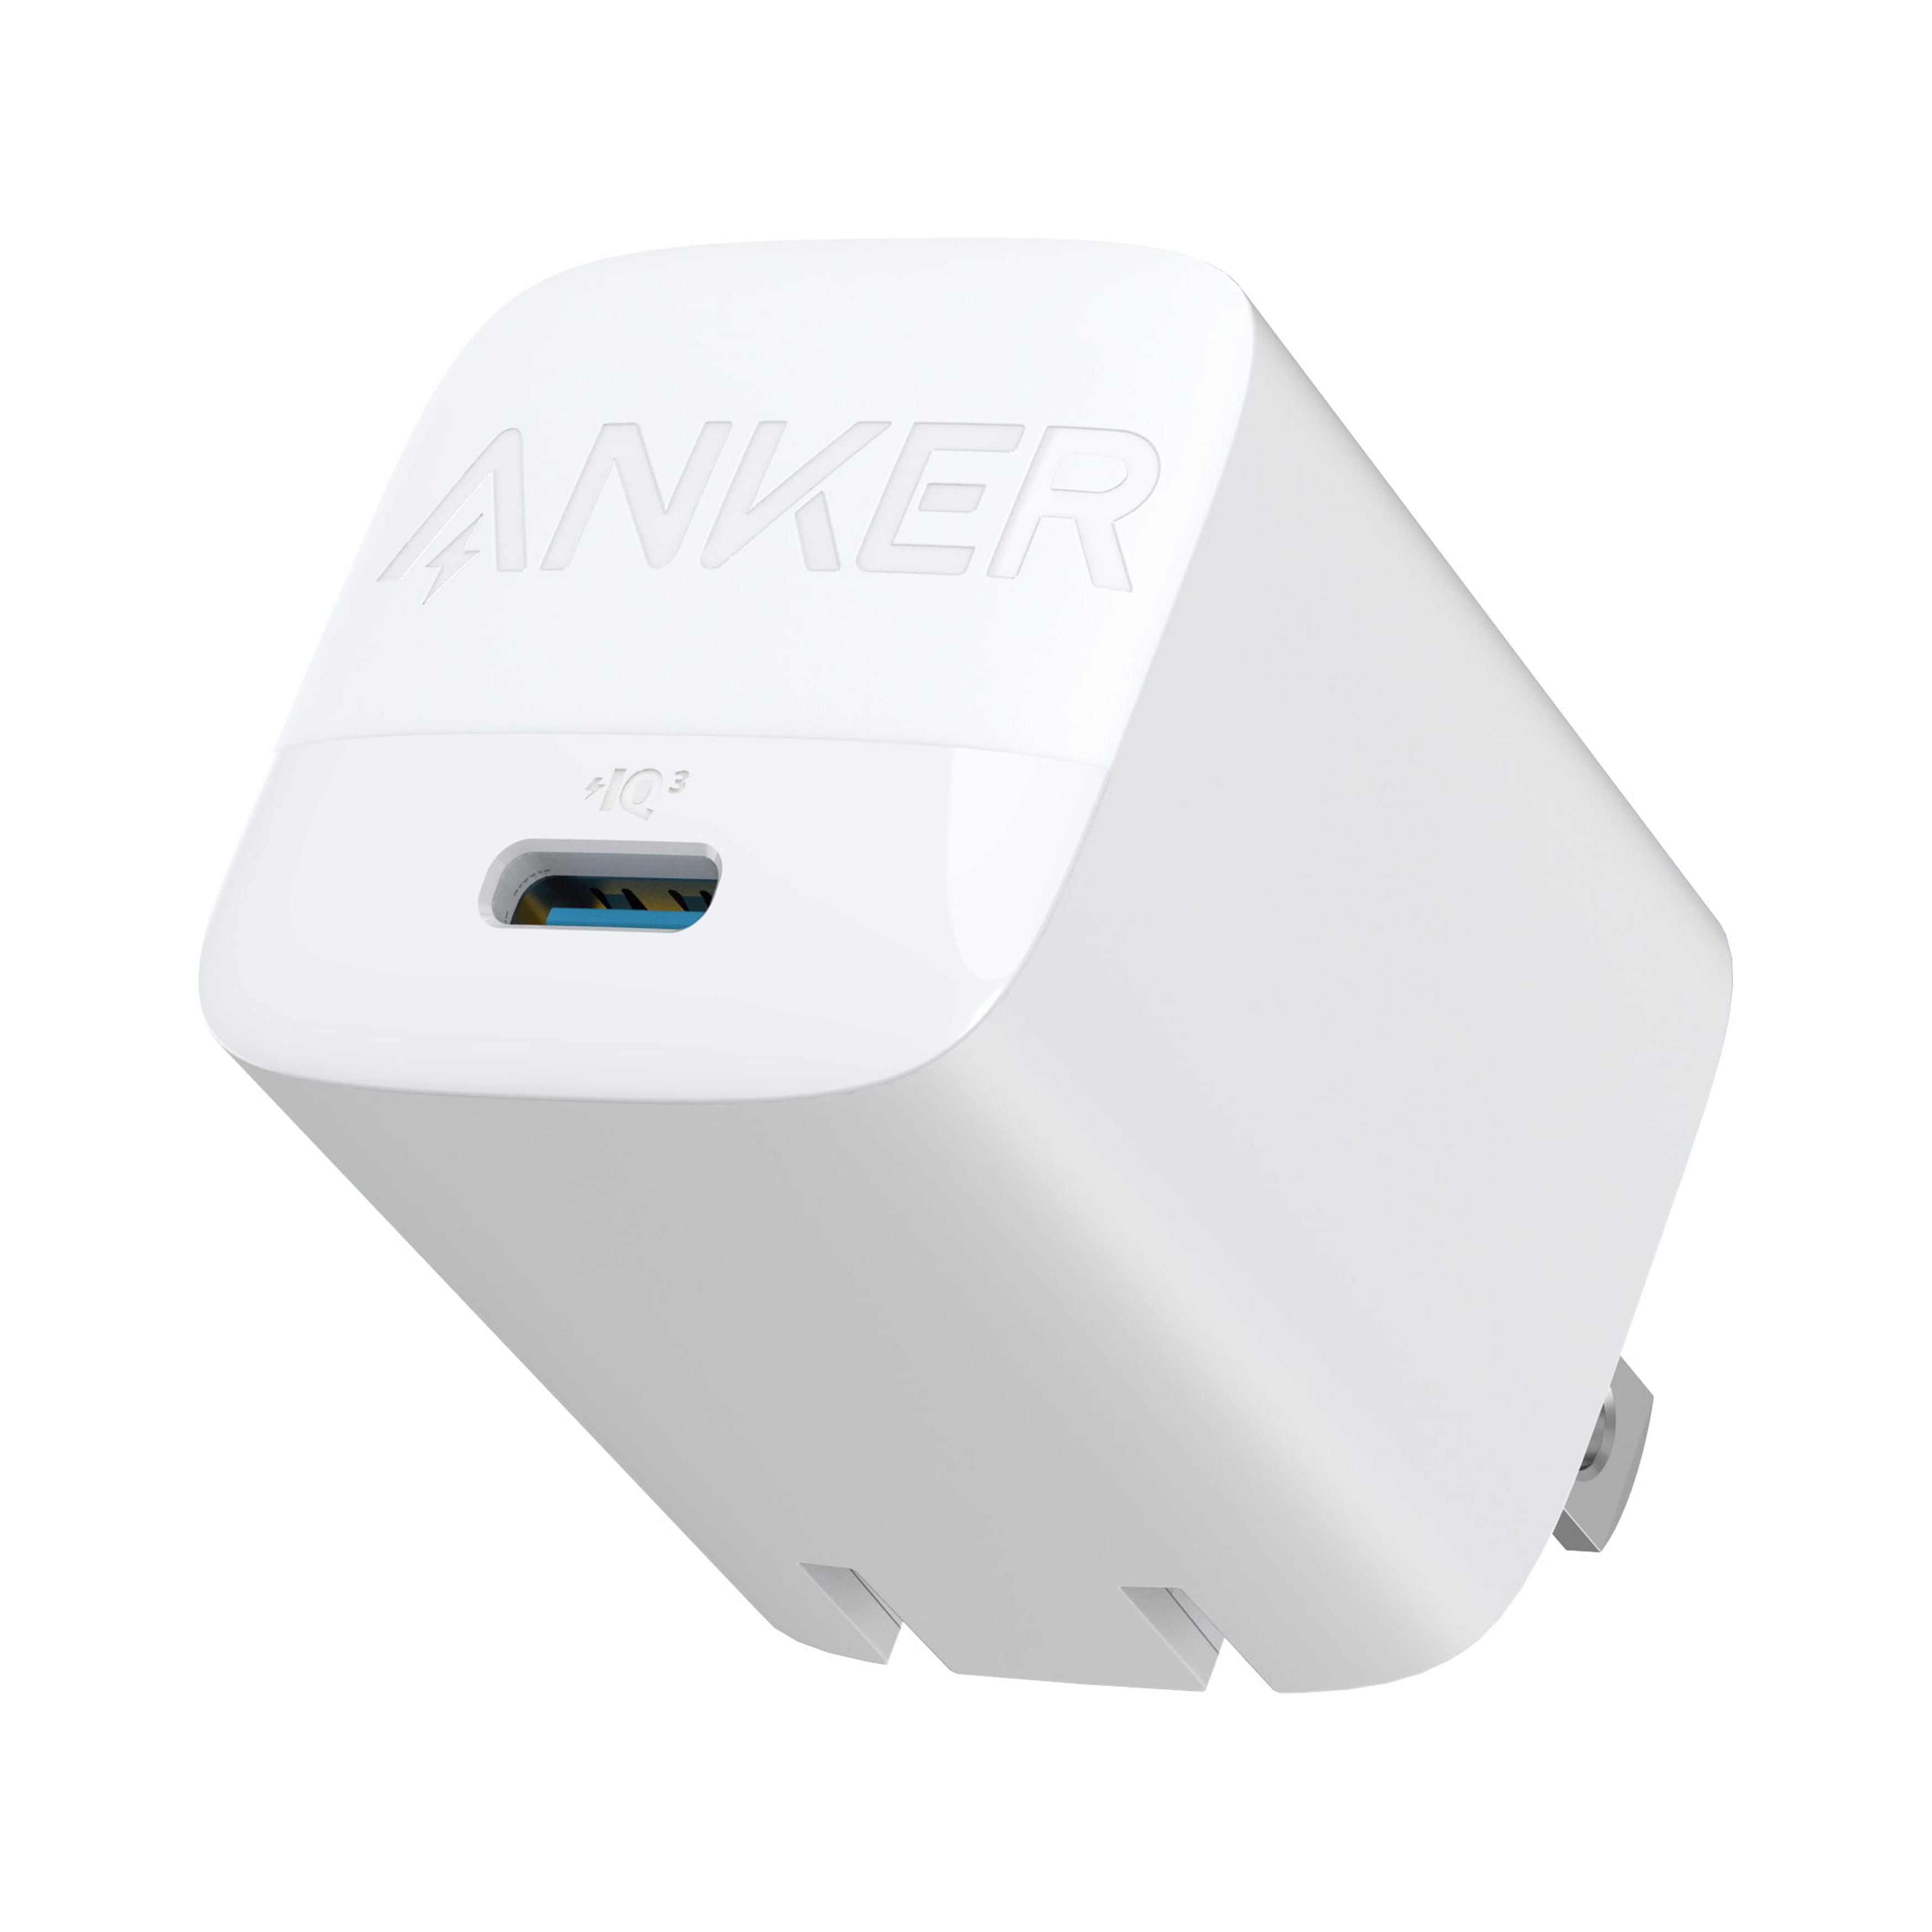 Anker USB-C 30W Charger Air/iPhone/Galaxy/iPad Pro, Pixel, and More - Walmart.com